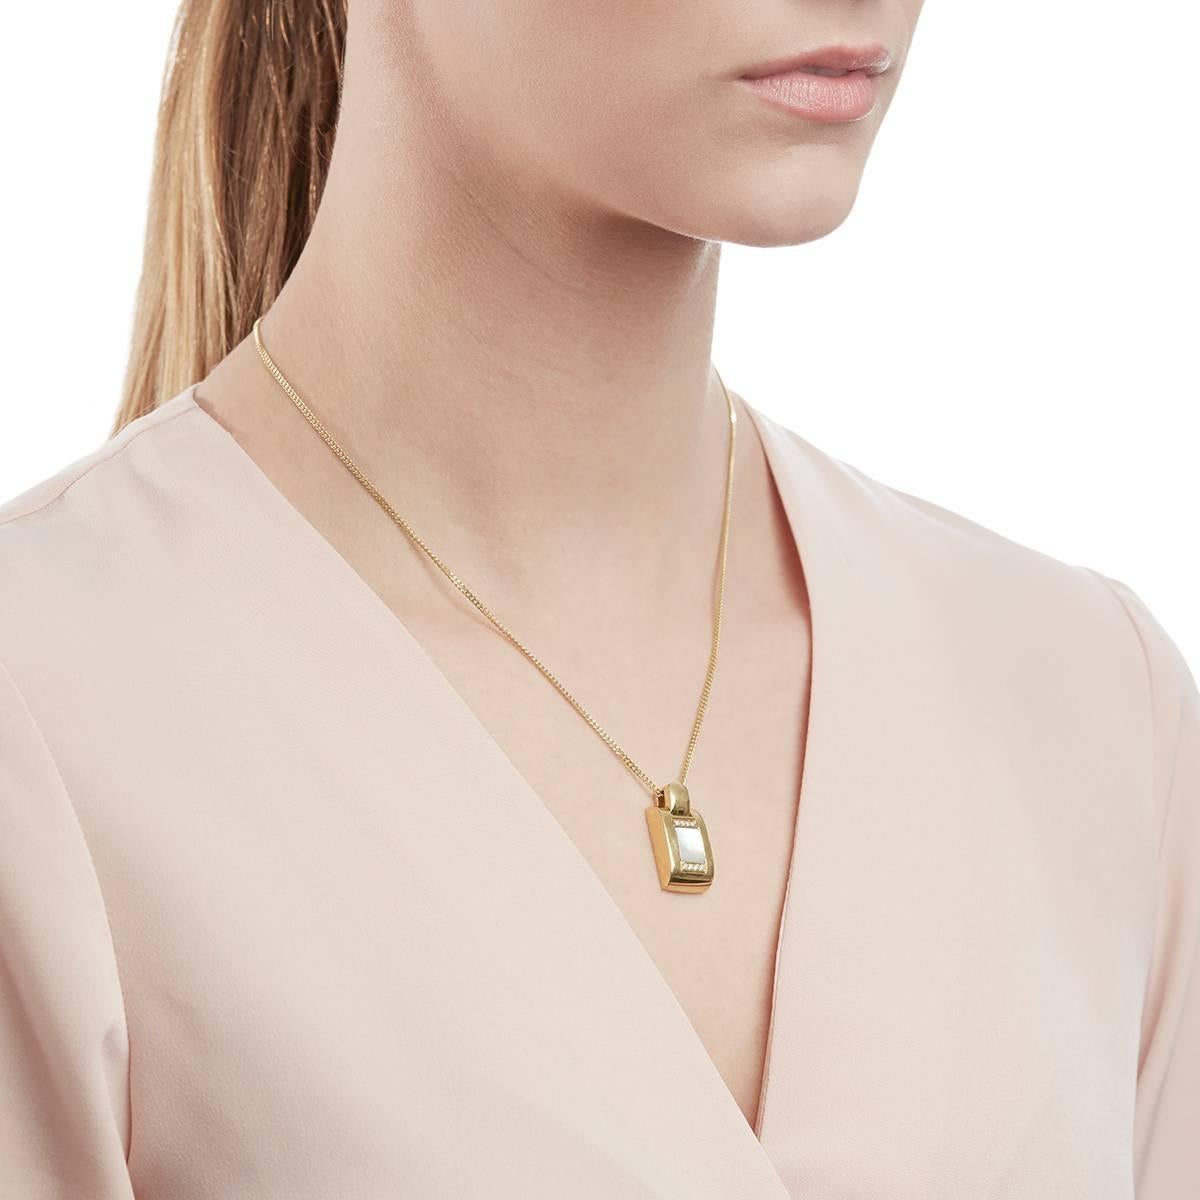 This Necklace by Audemars Piguet features a Pendant with Mabe Pearl and 8 round brilliant cut Diamonds of 0.08ct total colour G, clarity VS, made in 18k Yellow Gold with a total weight of 16.97 grams. The chain length is 46cm with a pendant width of